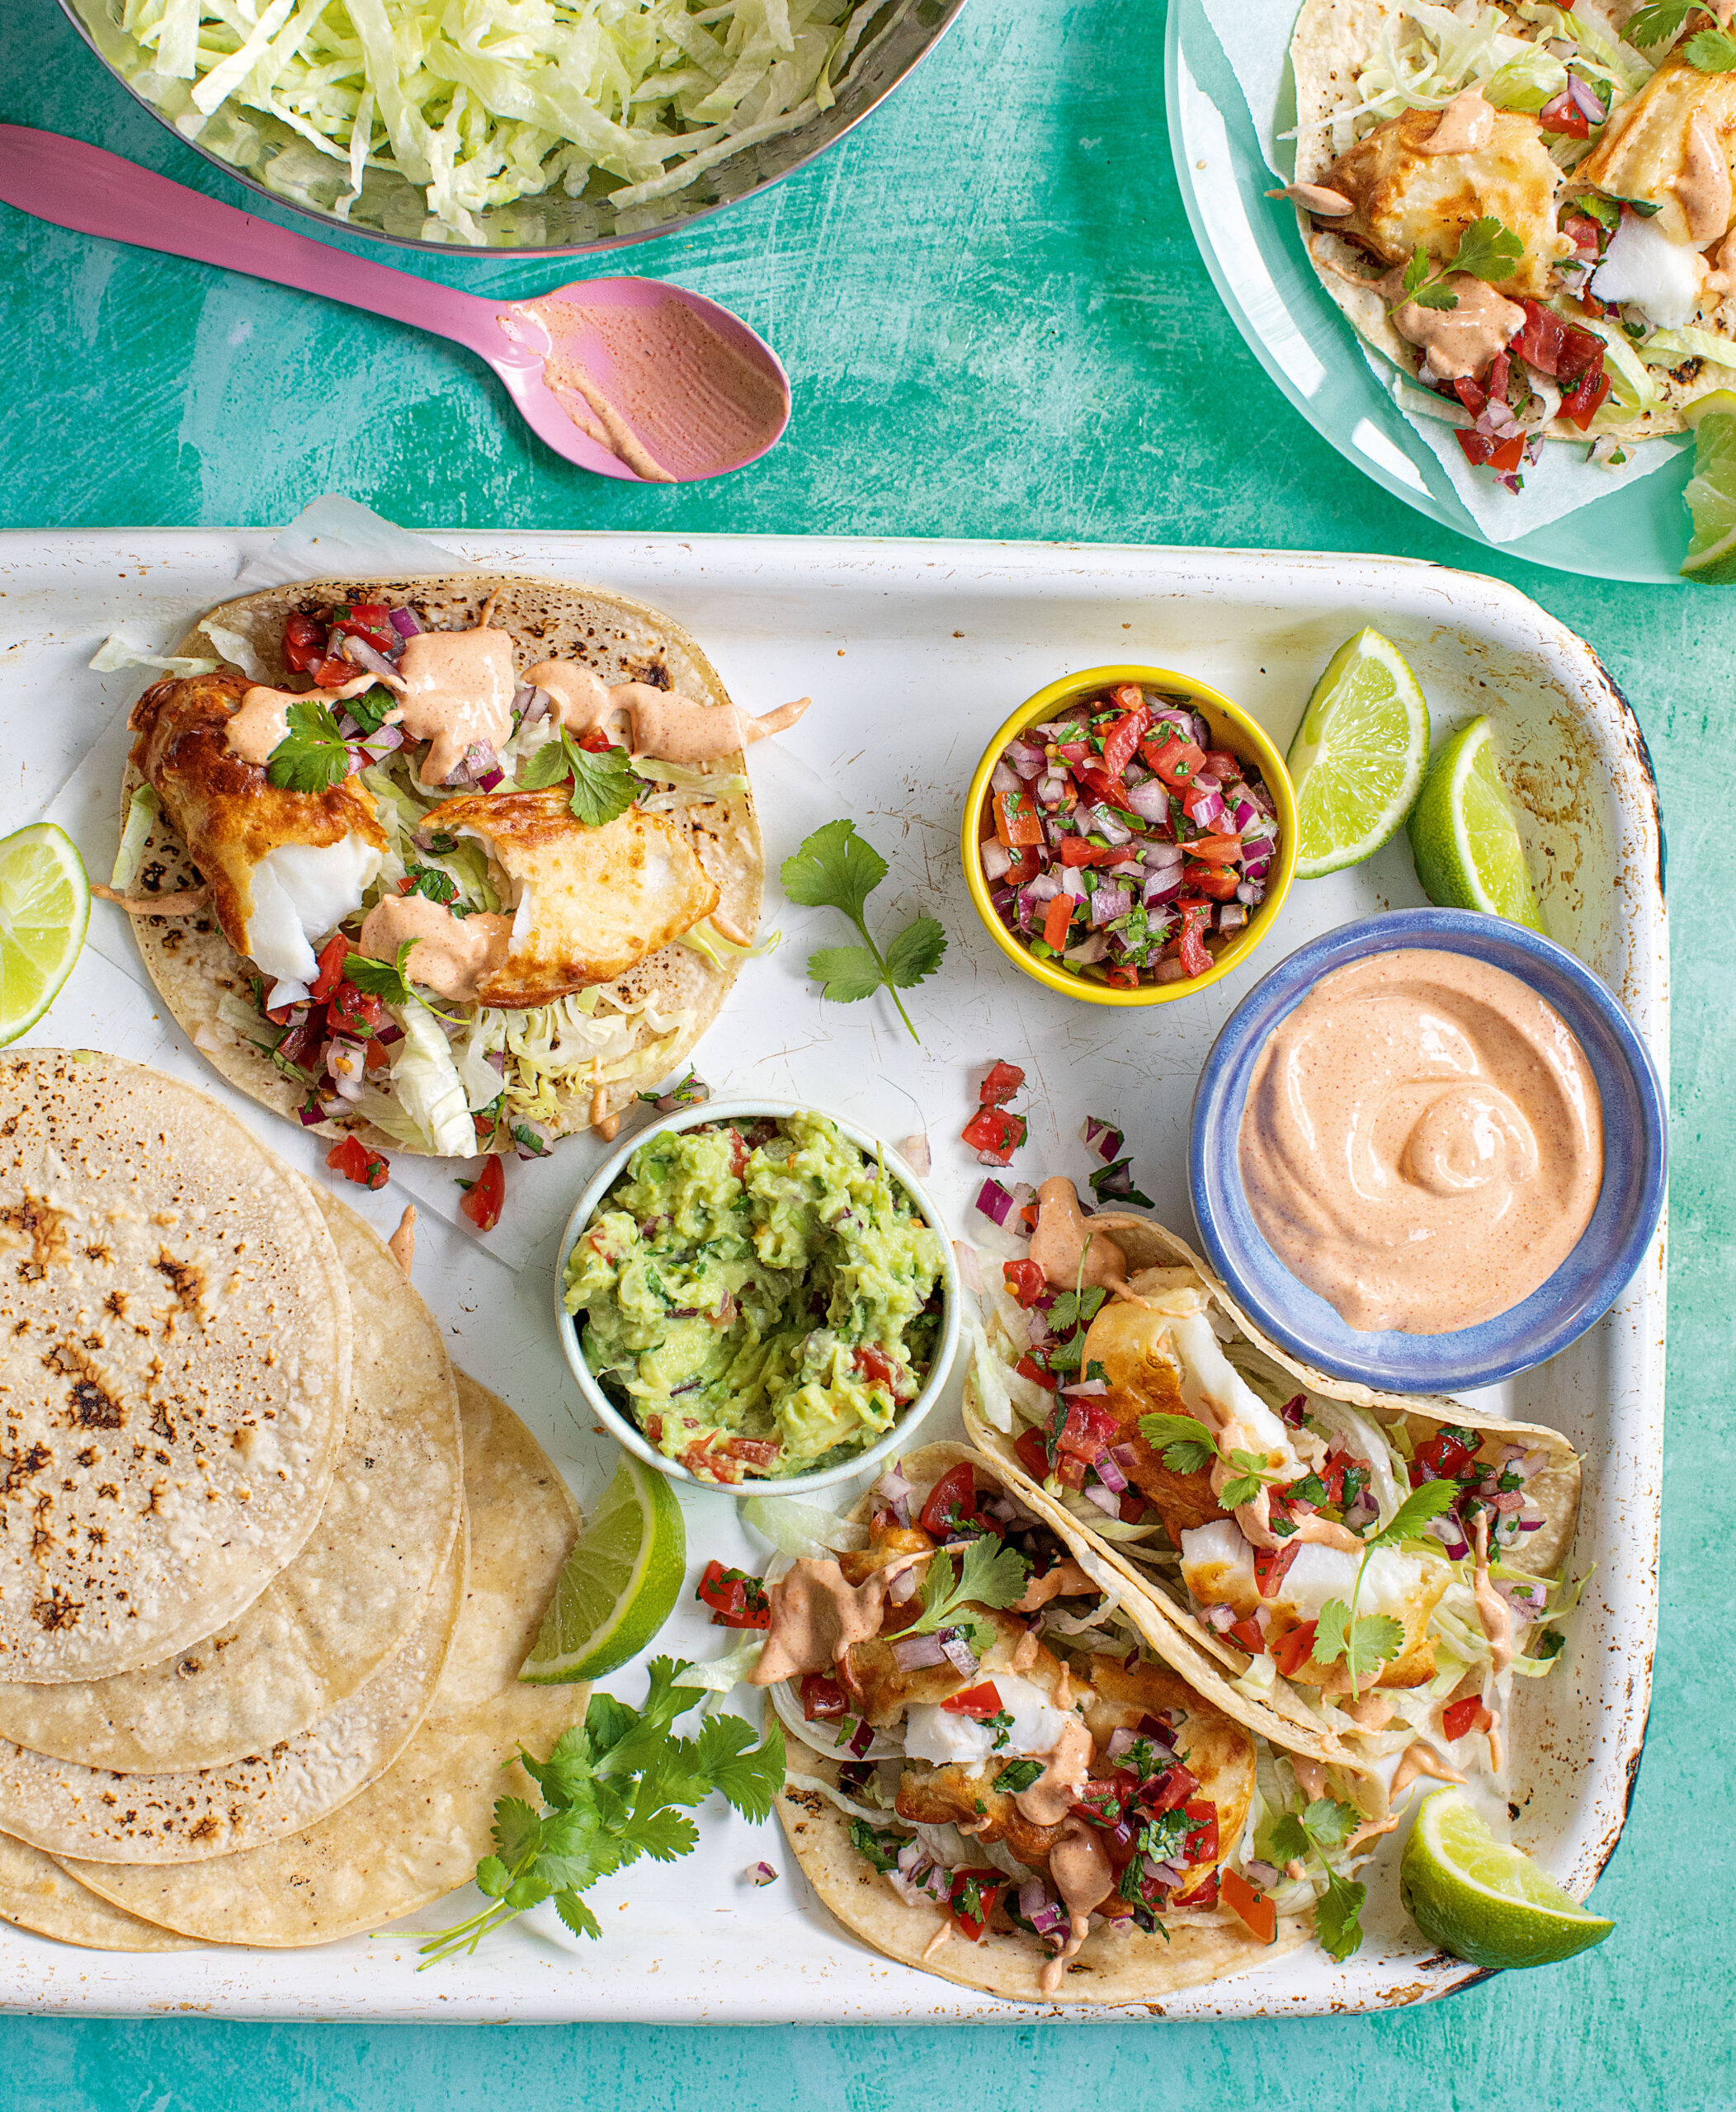 https://thehappyfoodie.co.uk/wp-content/uploads/2023/03/111_fishtacos-scaled.jpg